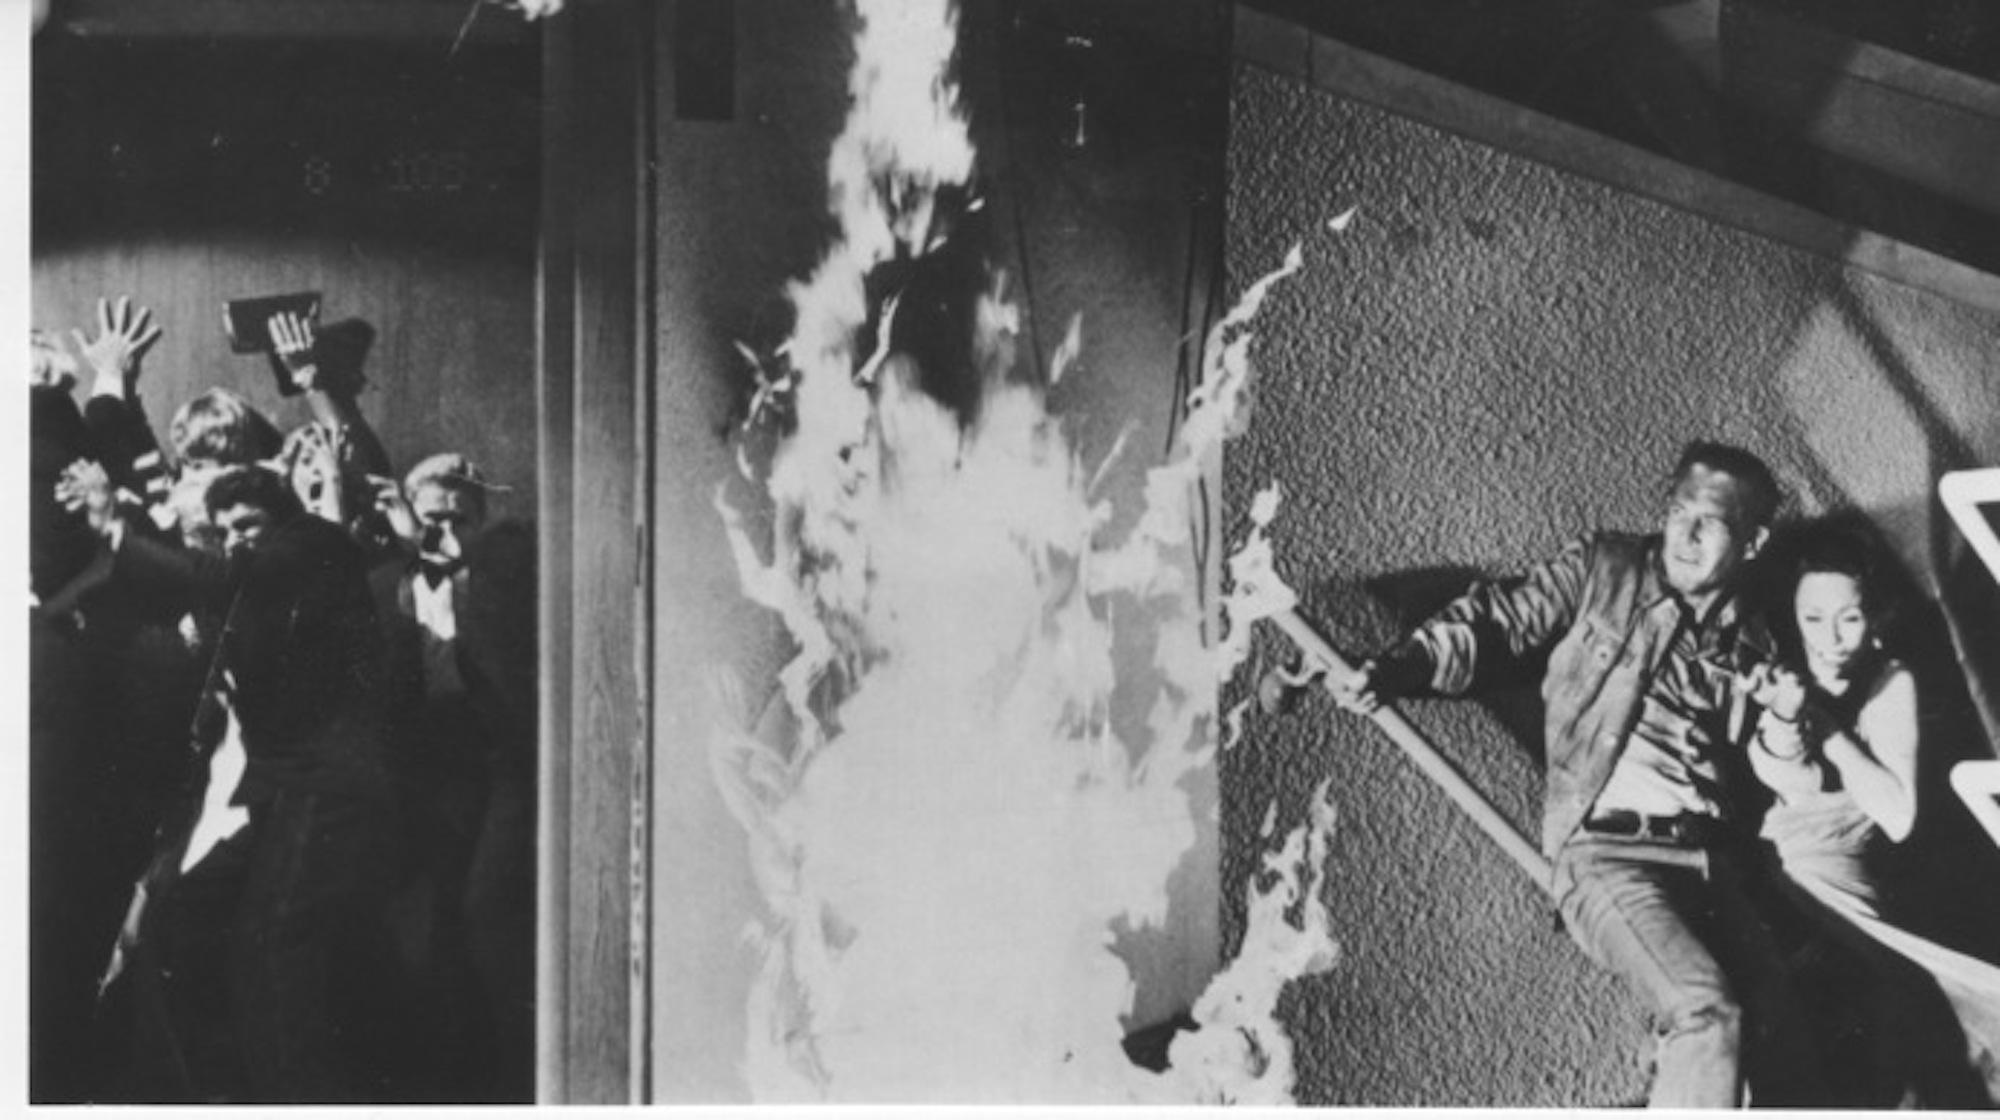 Paul Newman on the set of "The Towering Inferno" - Vintage Photo - 1974